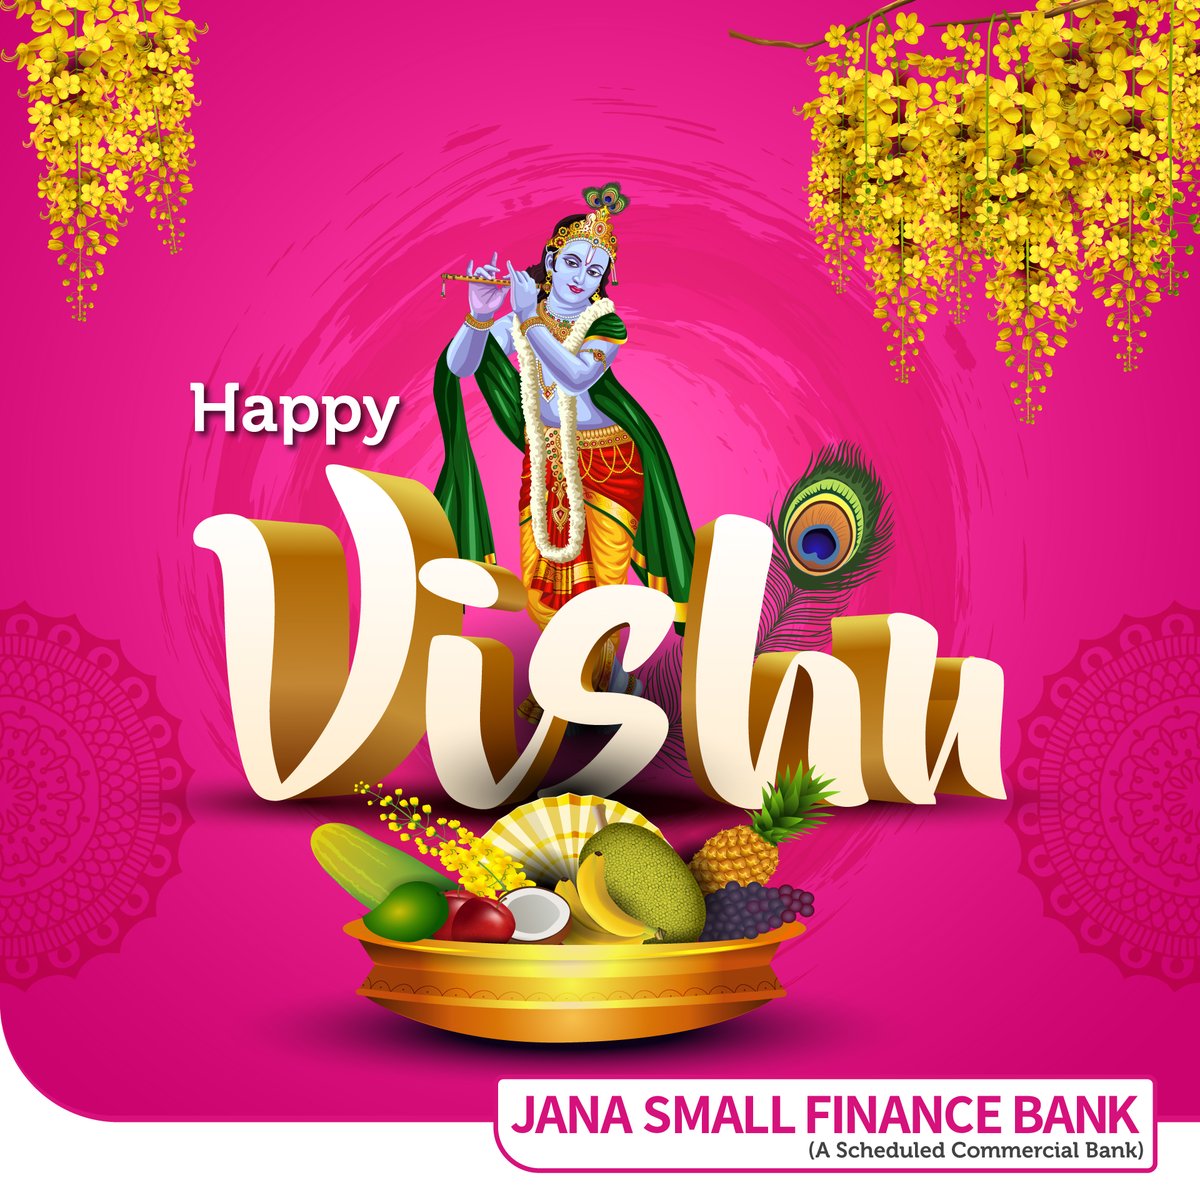 Wishing everyone a joyous Puthandu and Vishu filled with prosperity, happiness, and new beginnings! Let's welcome this auspicious day with love and positivity. #puthandu #vishu #janabank